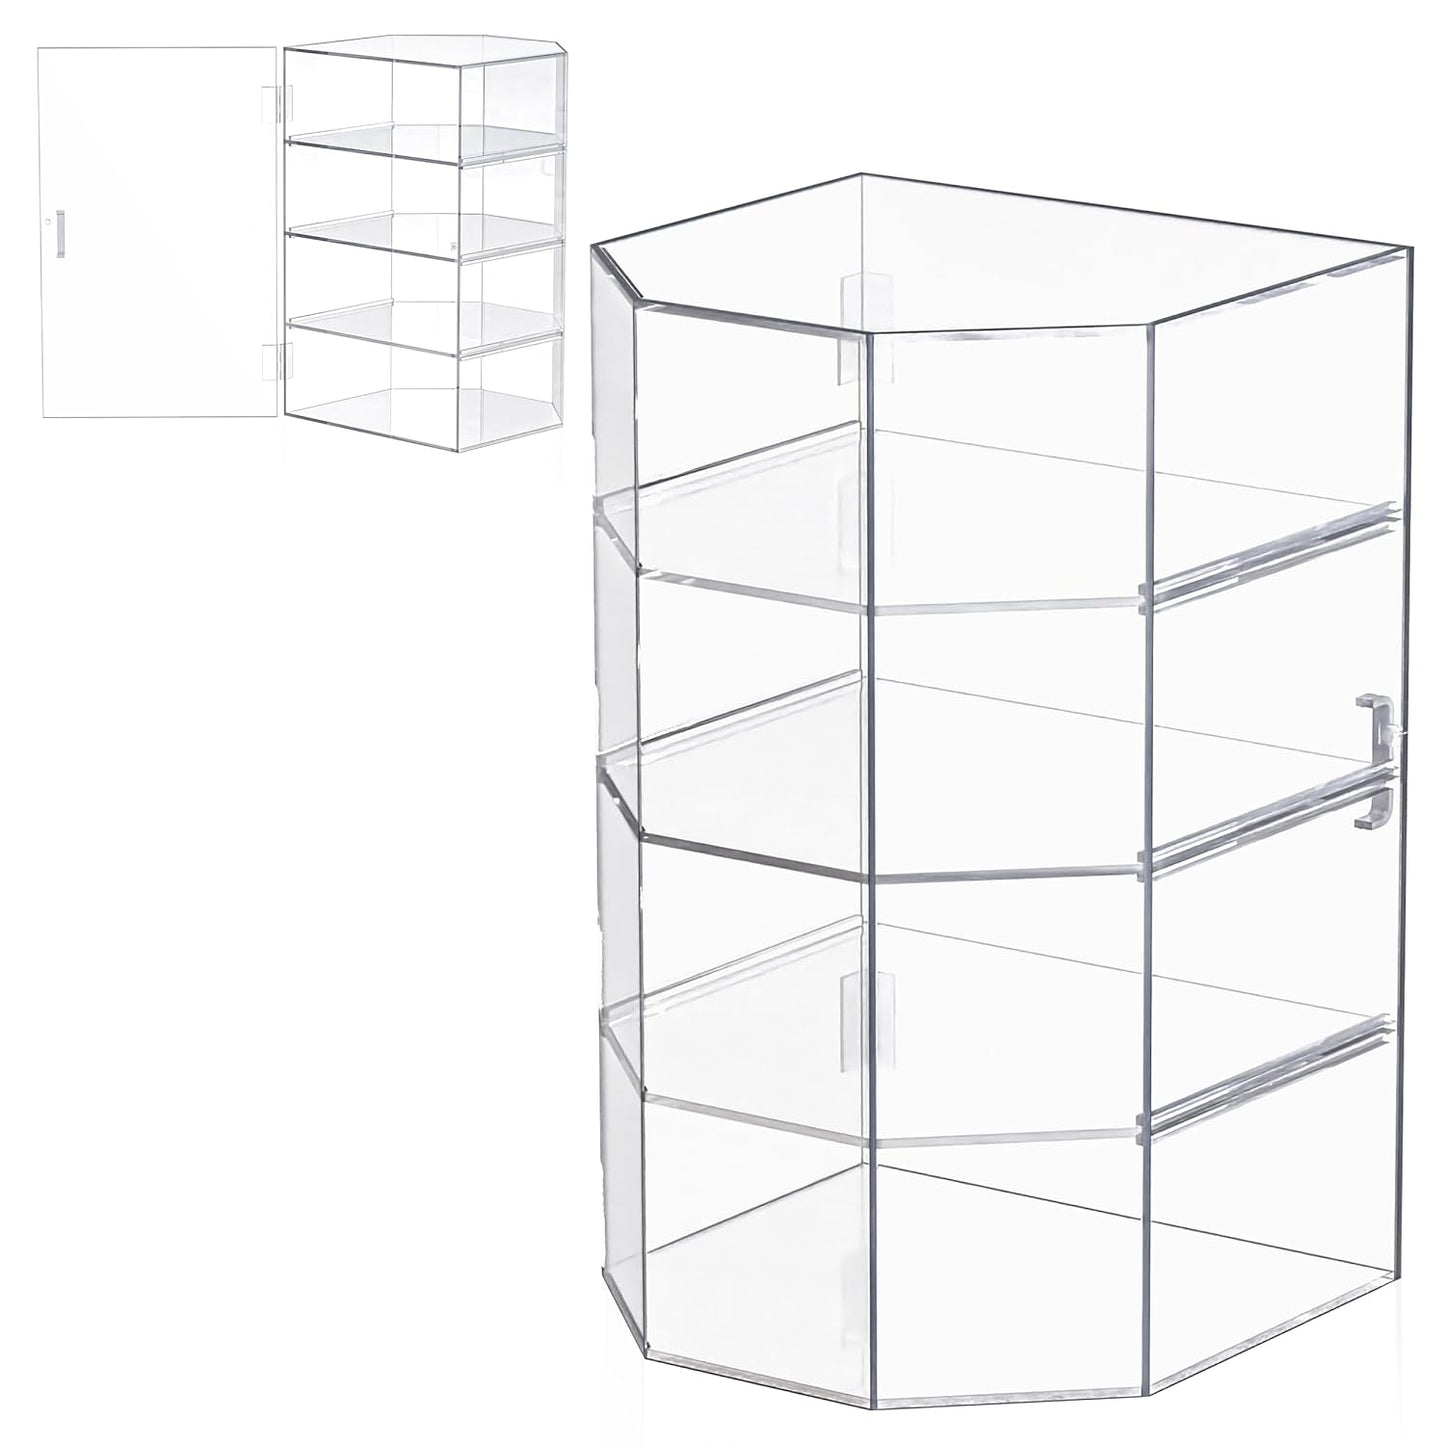 PanorEats 4-Tiered Bakery Display Case - Fully-Assembled Acrylic Pastry Display Cabinet - Countertop Display Case for Breads, Muffins, Desserts, Cookies, Pies - Retail Display For Party, Mar